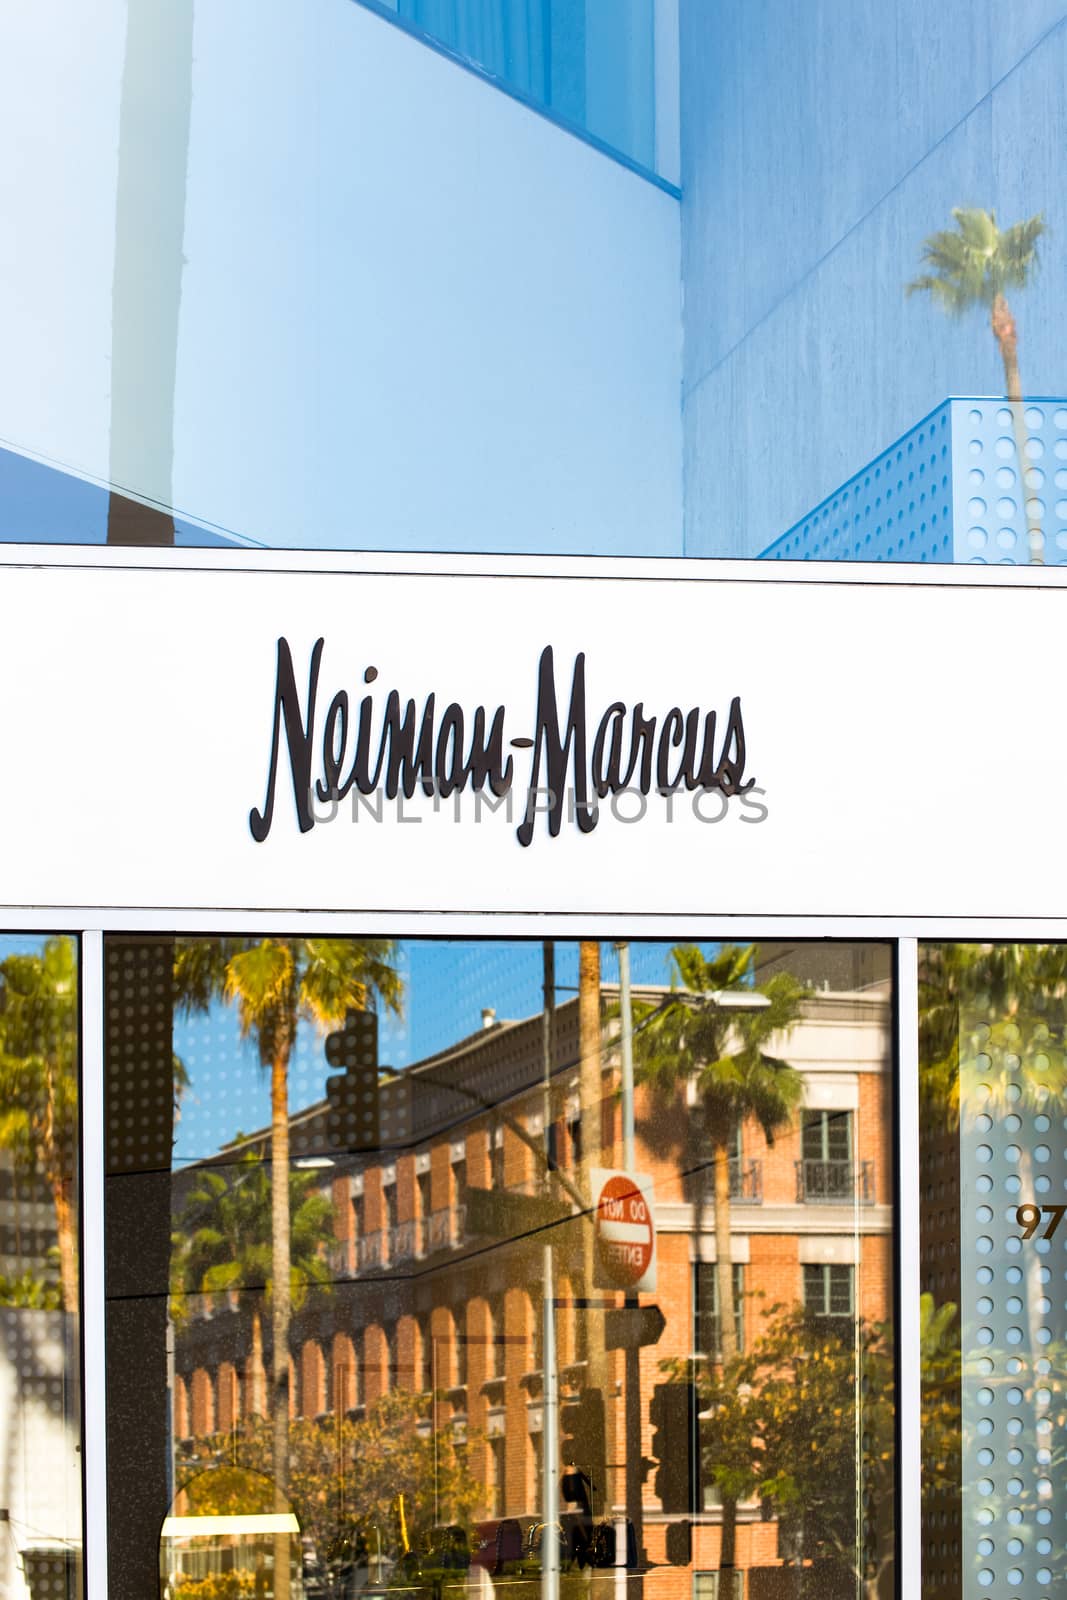 LOS ANGELES, CA/USA - NOVEMBER 11, 2015: Neiman Marcus store entrance and logo. Neiman-Marcus, is an American luxury specialty department store owned by the Neiman Marcus Group.